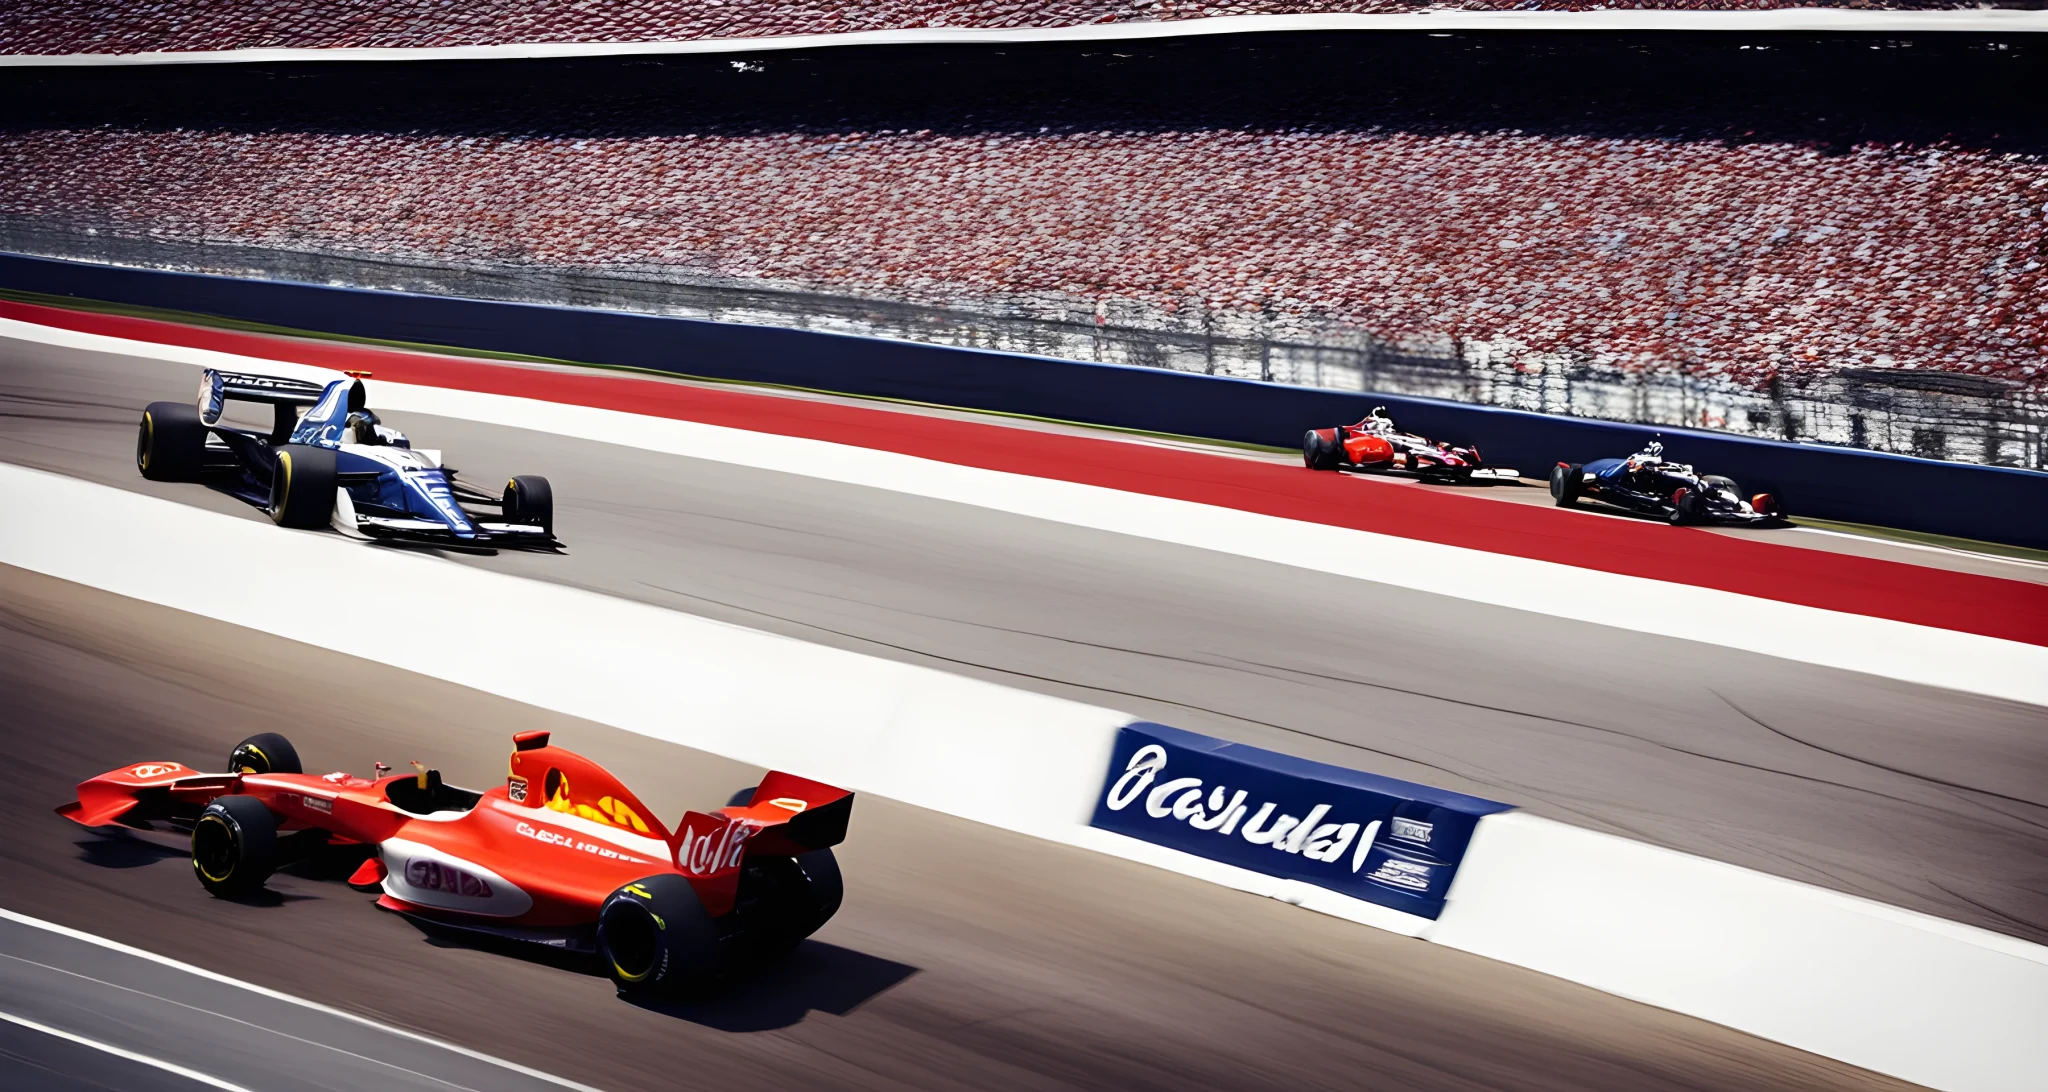 The image features a Formula 1 car and a NASCAR vehicle side by side on a racetrack, surrounded by spectators in the grandstands.